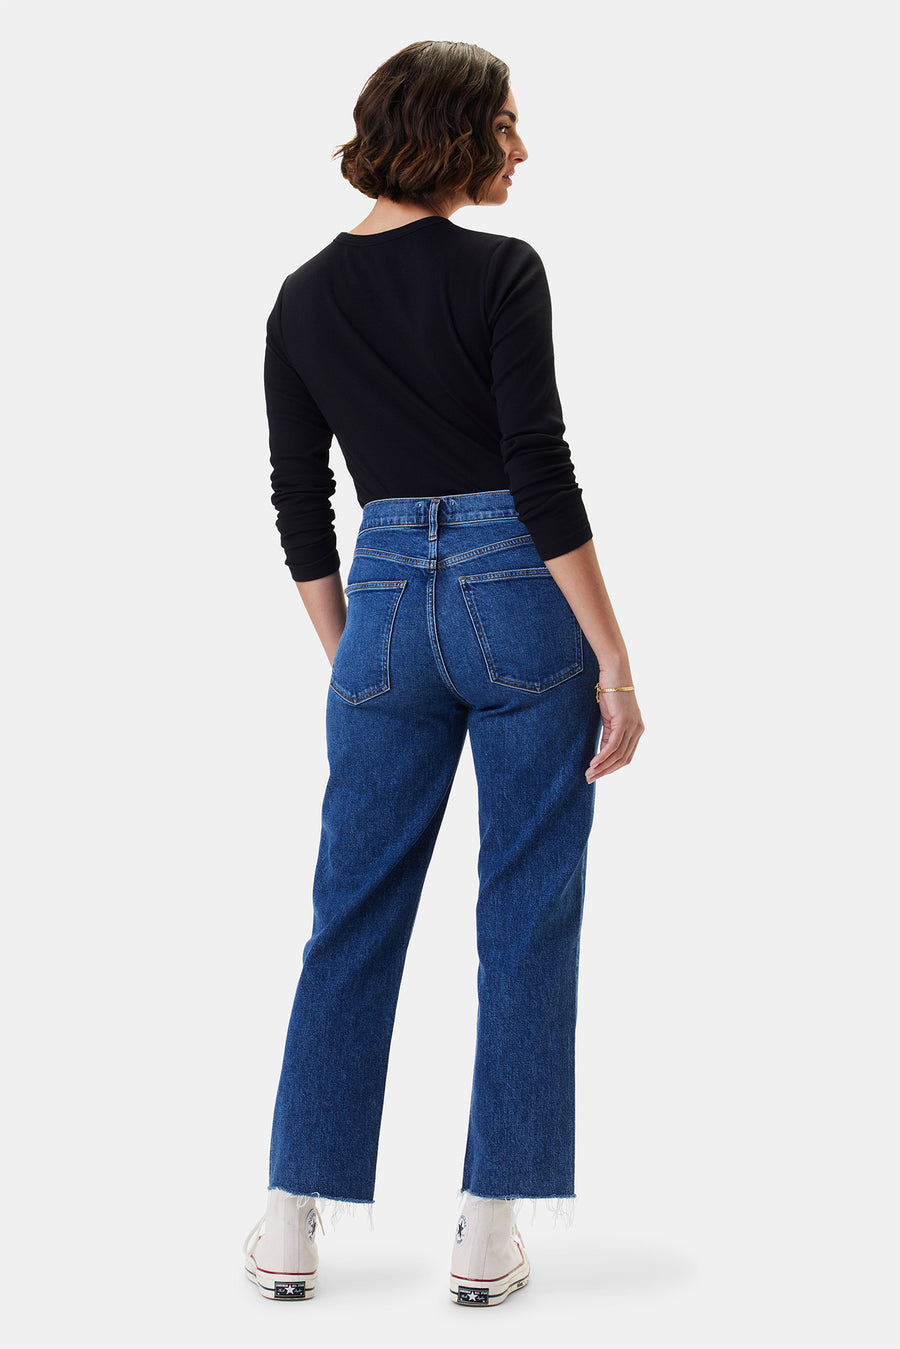 AGOLDE Kye Mid Rise Straight Crop Jean - Mirage